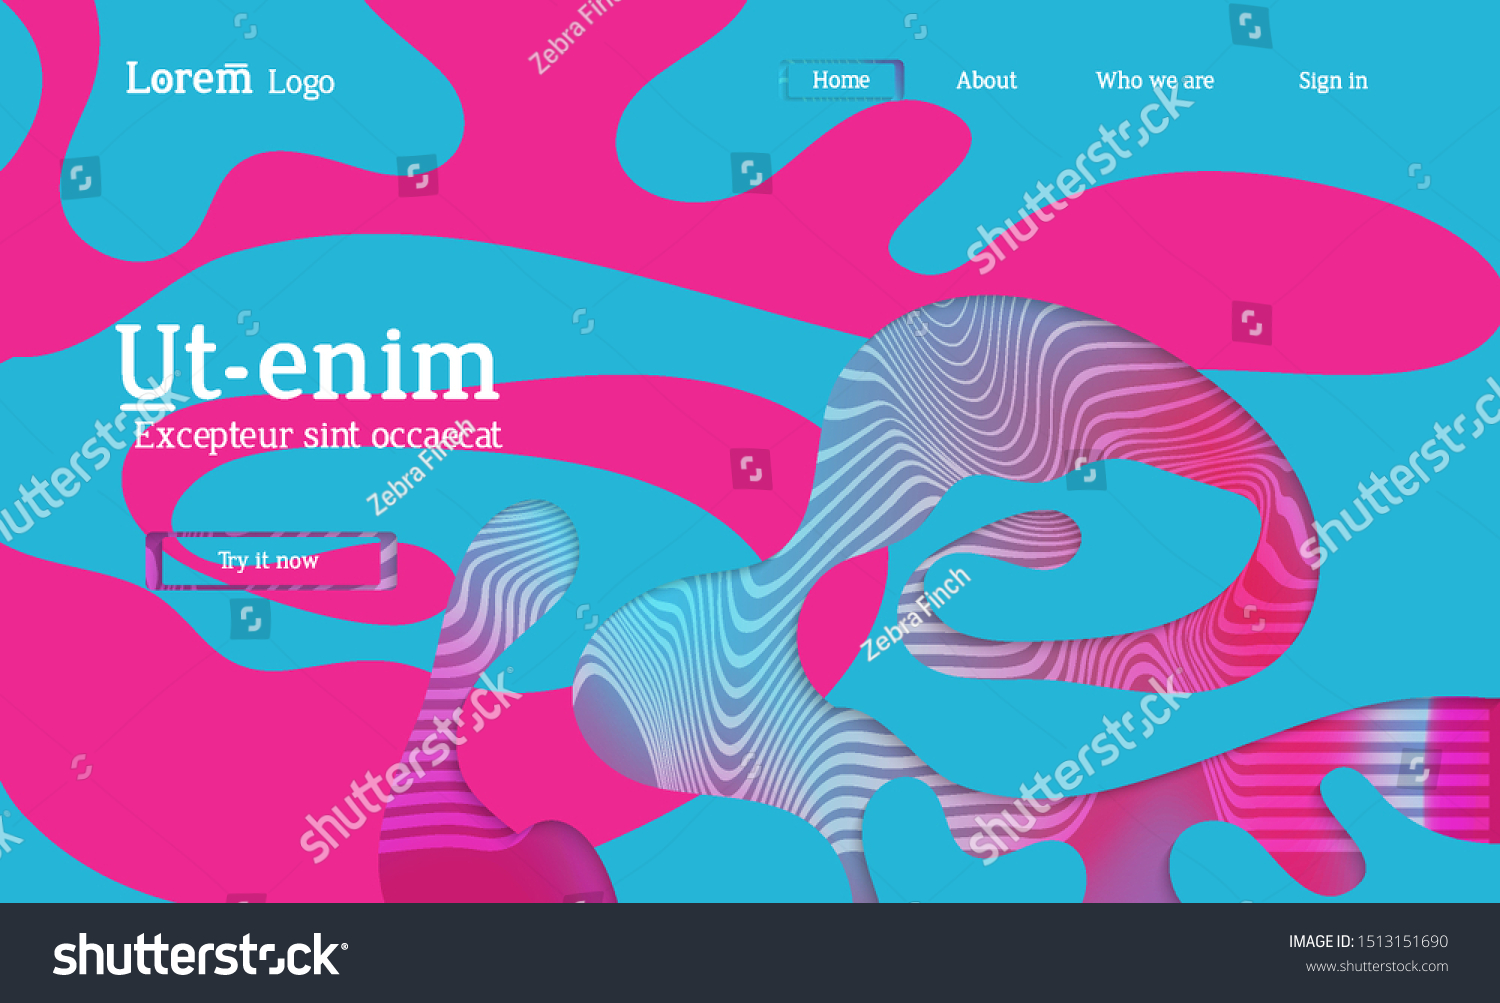 Abstract universal web template with simple wavy shapes and cut out paper with shadow over striped background. Social media web banner. Bright colored isolated. #1513151690